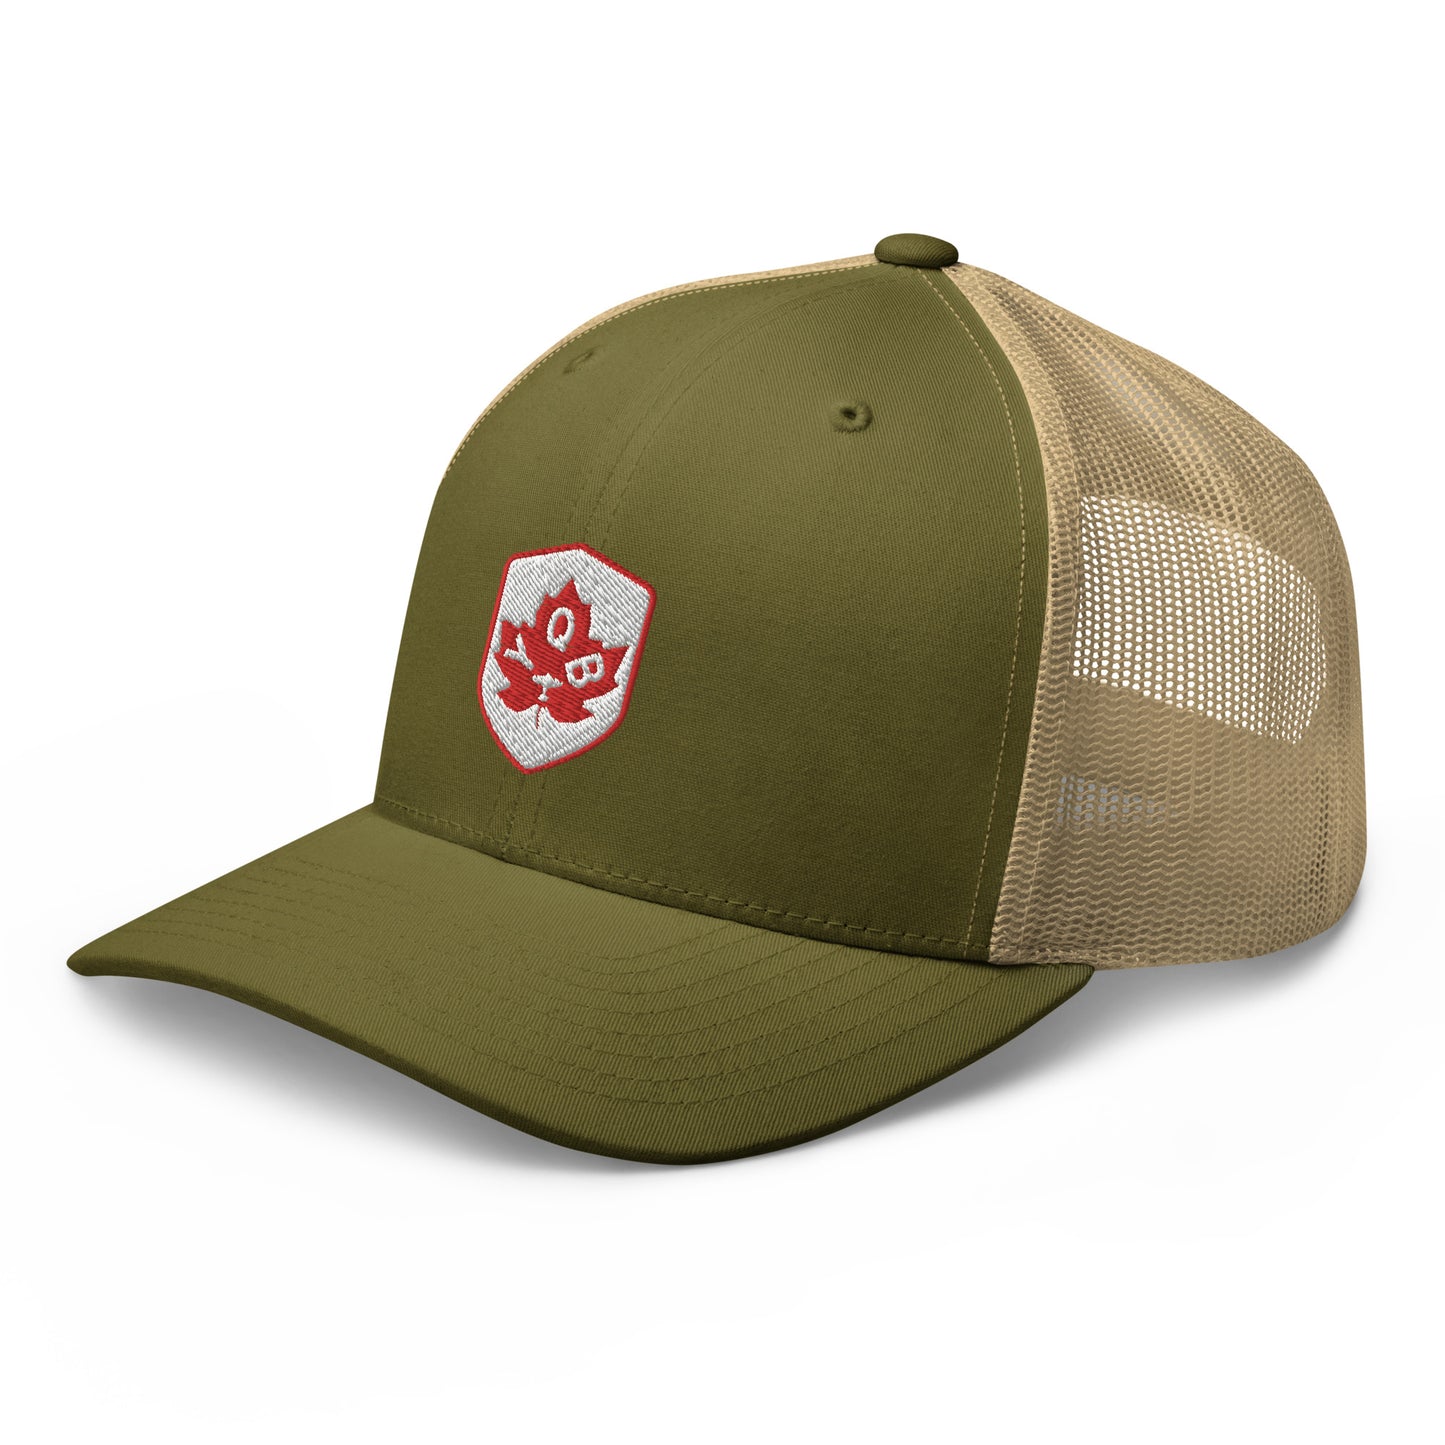 Maple Leaf Trucker Hat - Red/White • YQB Quebec City • YHM Designs - Image 31